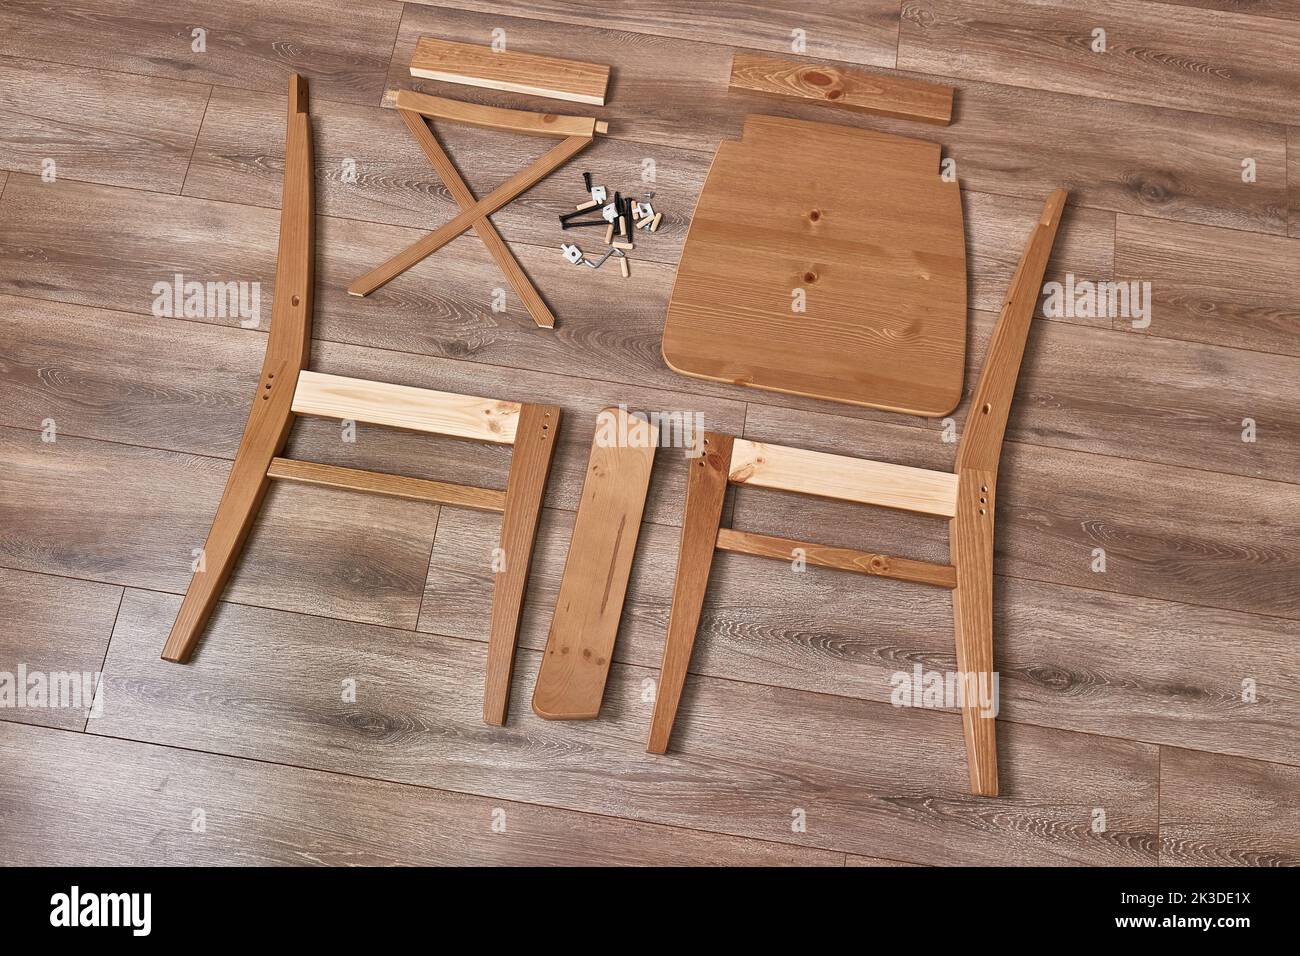 Cabinet furniture assembly for home improvement Stock Photo